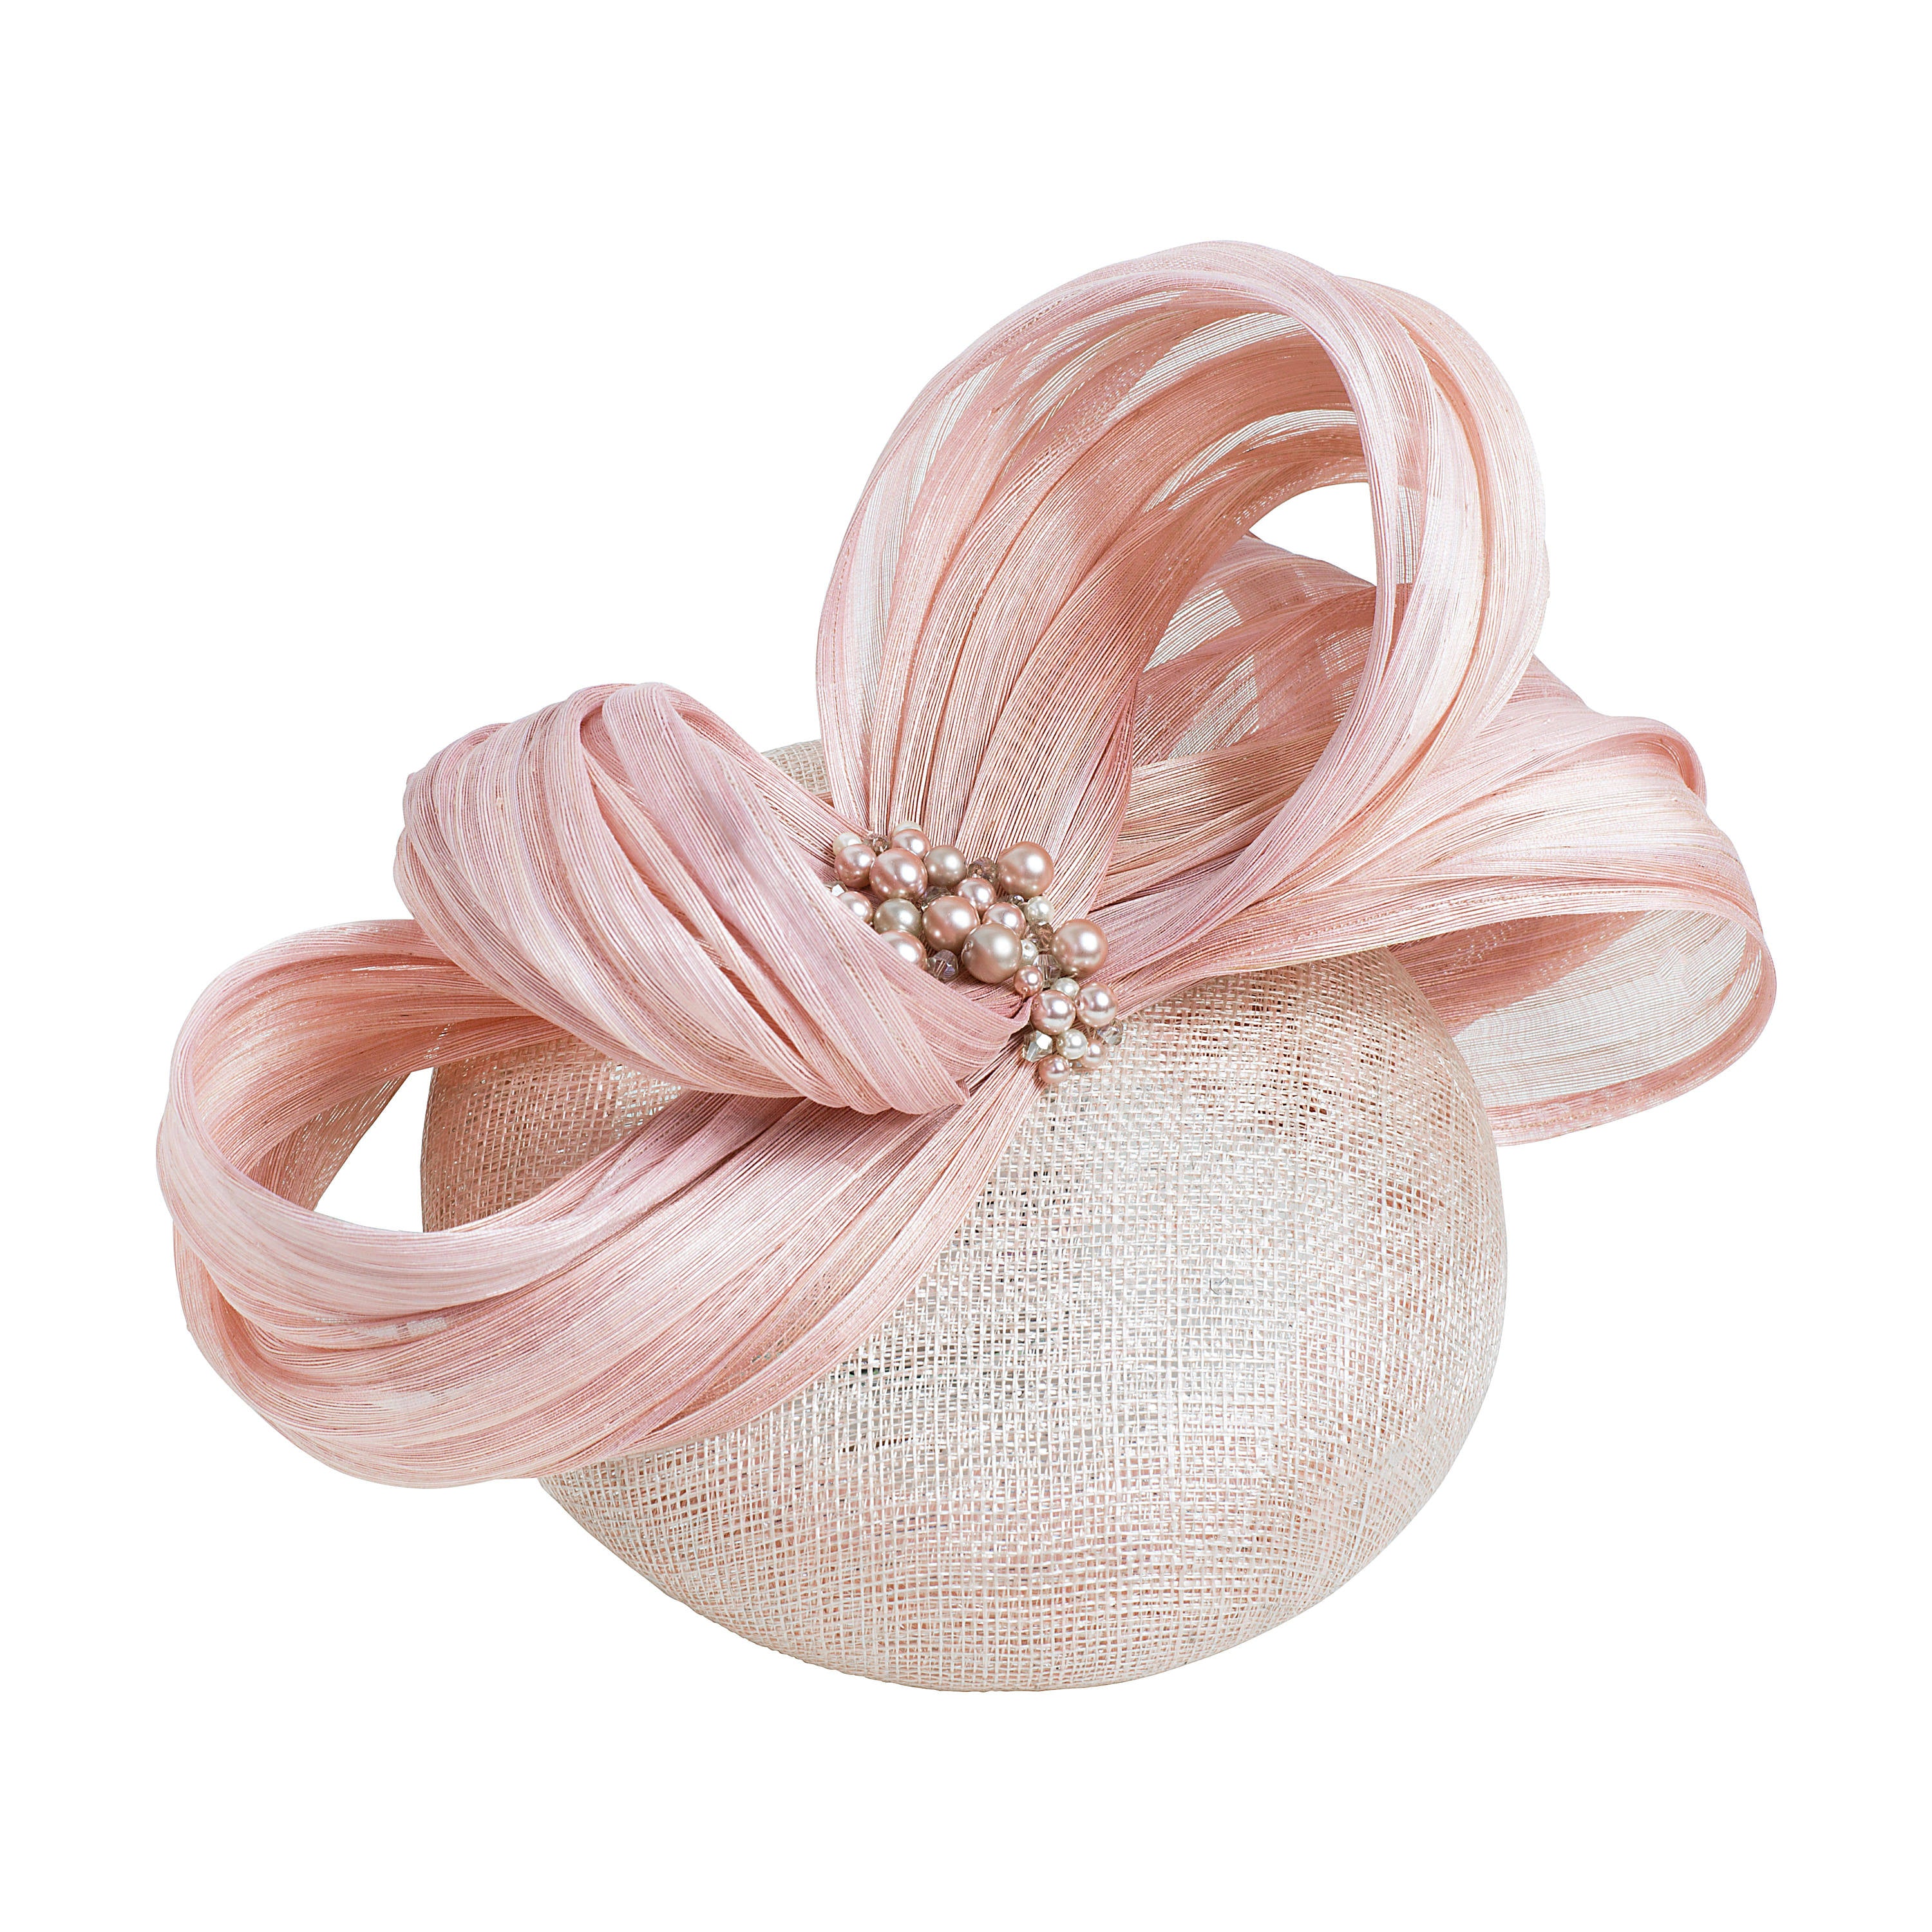 blush pink pillbox fascinator hat, ideal for wedding guest or royal ascot